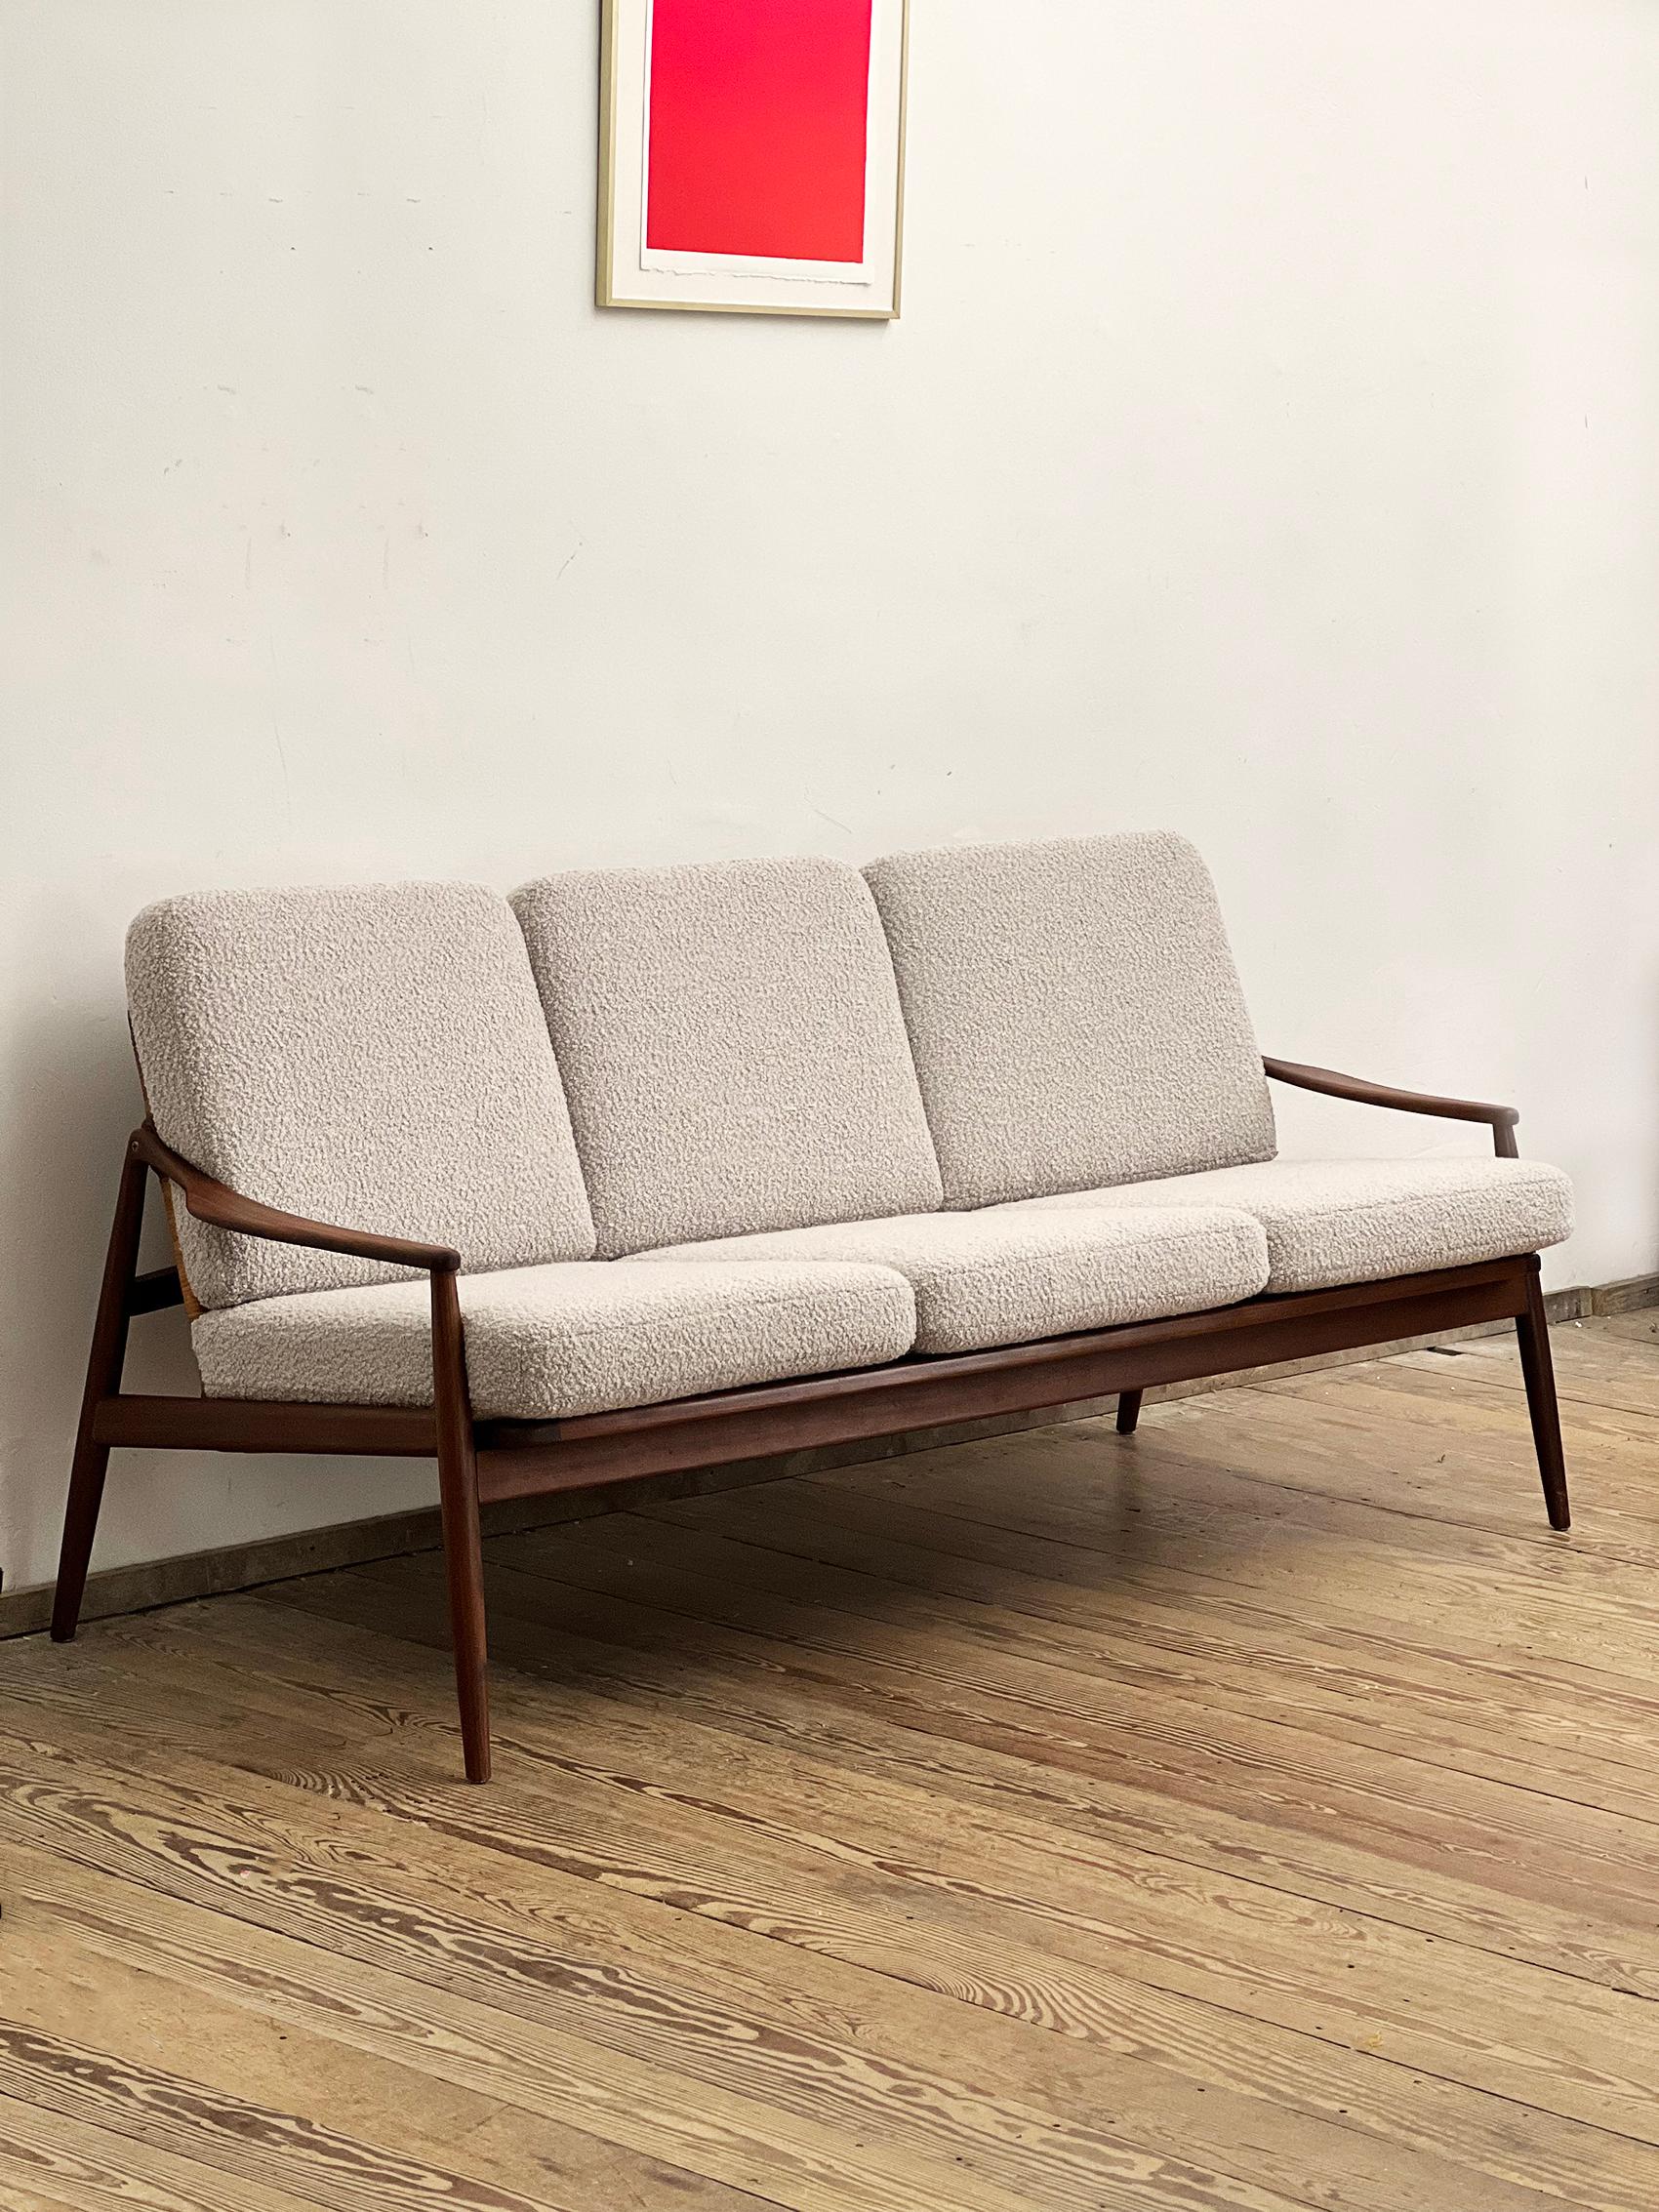 Mid-Century Teak Sofa or Couch by Hartmut Lohmeyer, German Design, 1950s For Sale 1